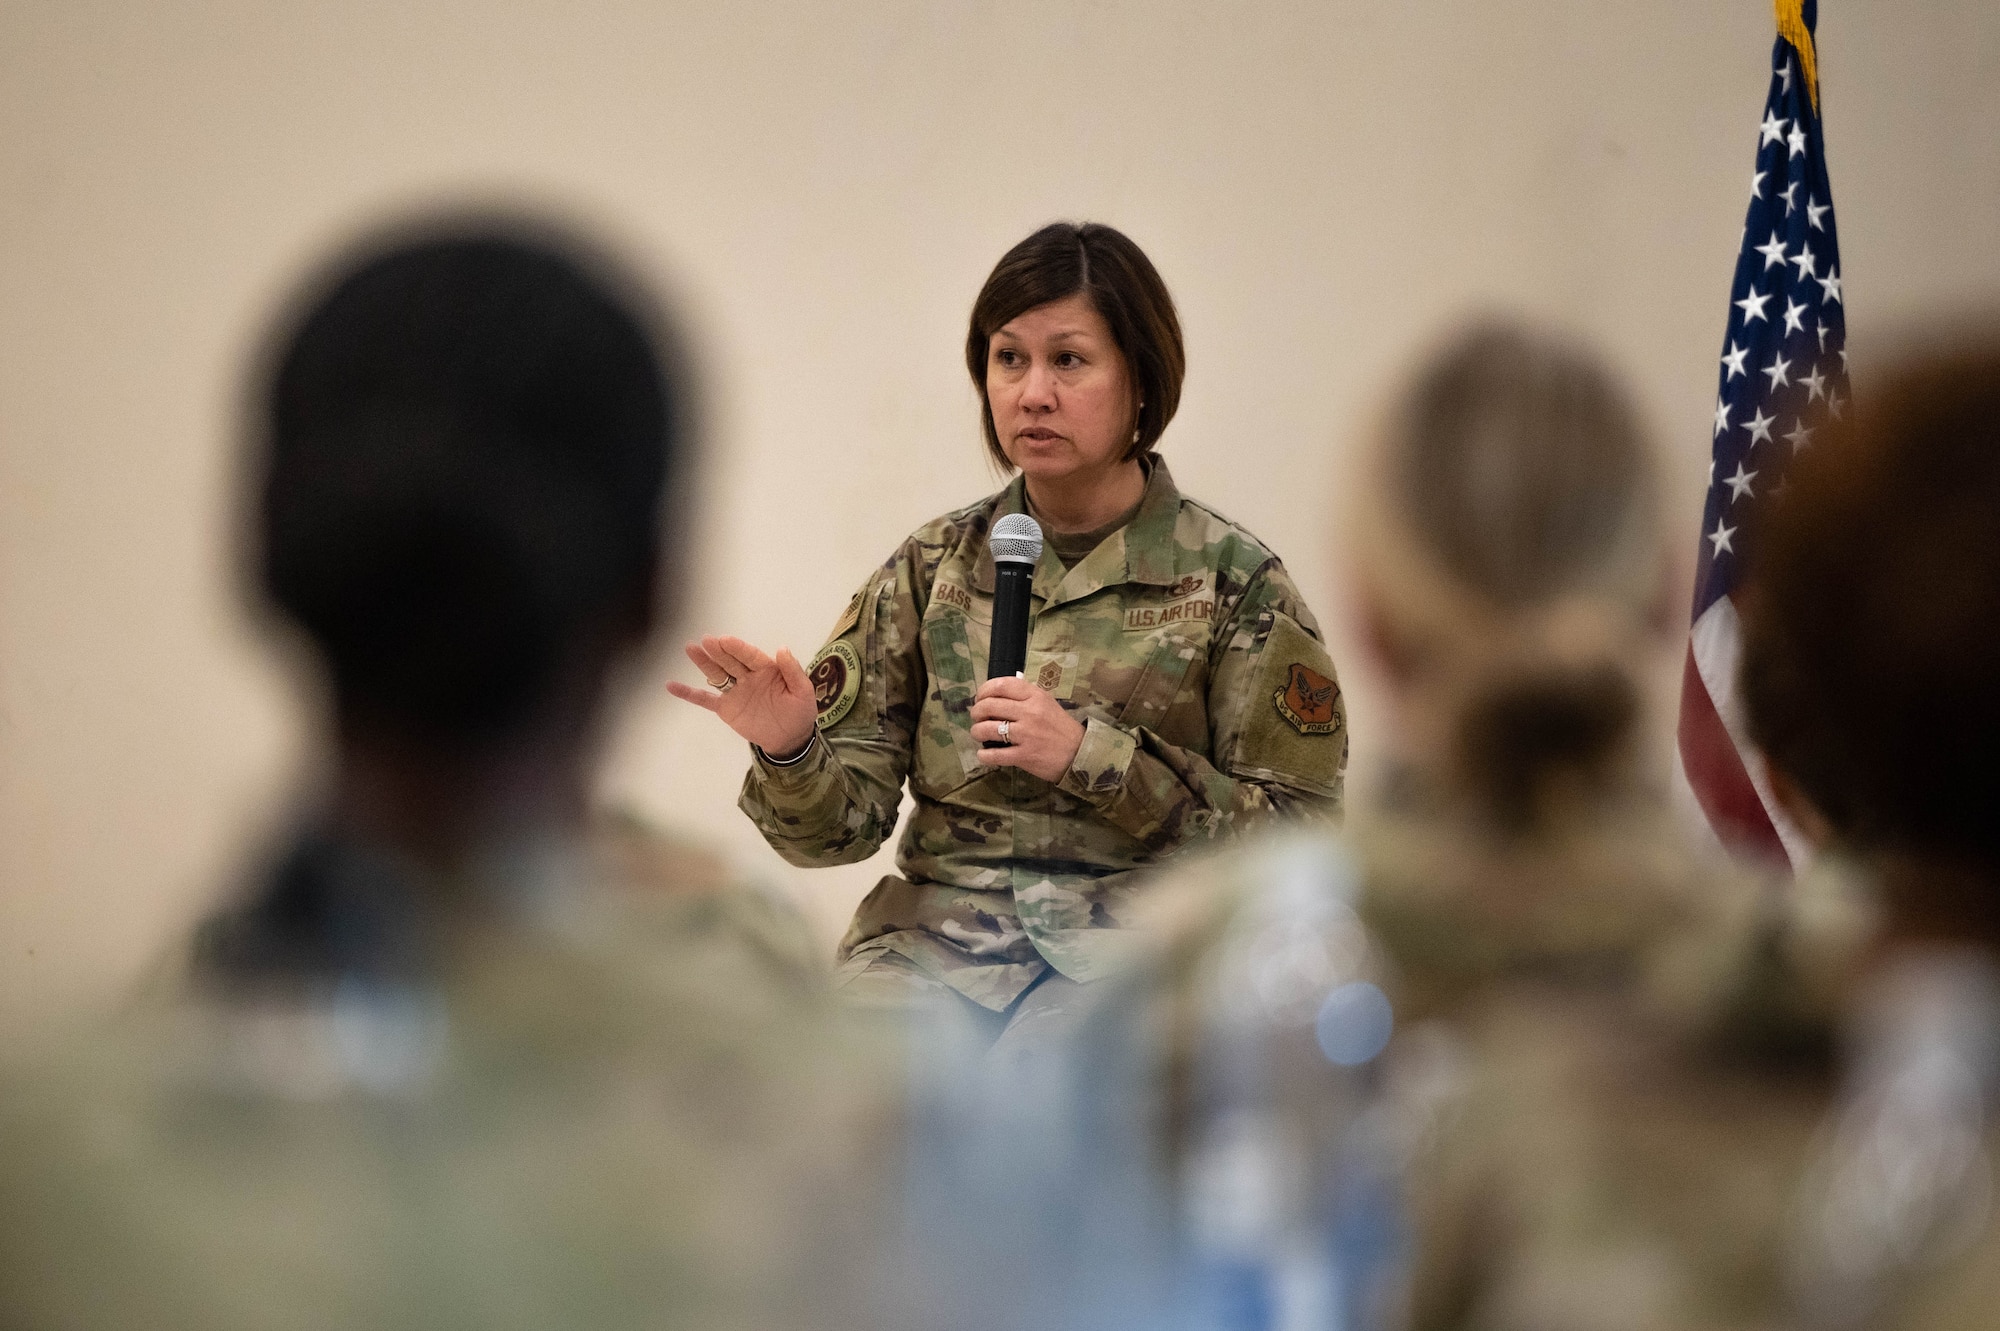 Chief Master Sgt. of the Air Force JoAnne S. Bass speaks into a microphone